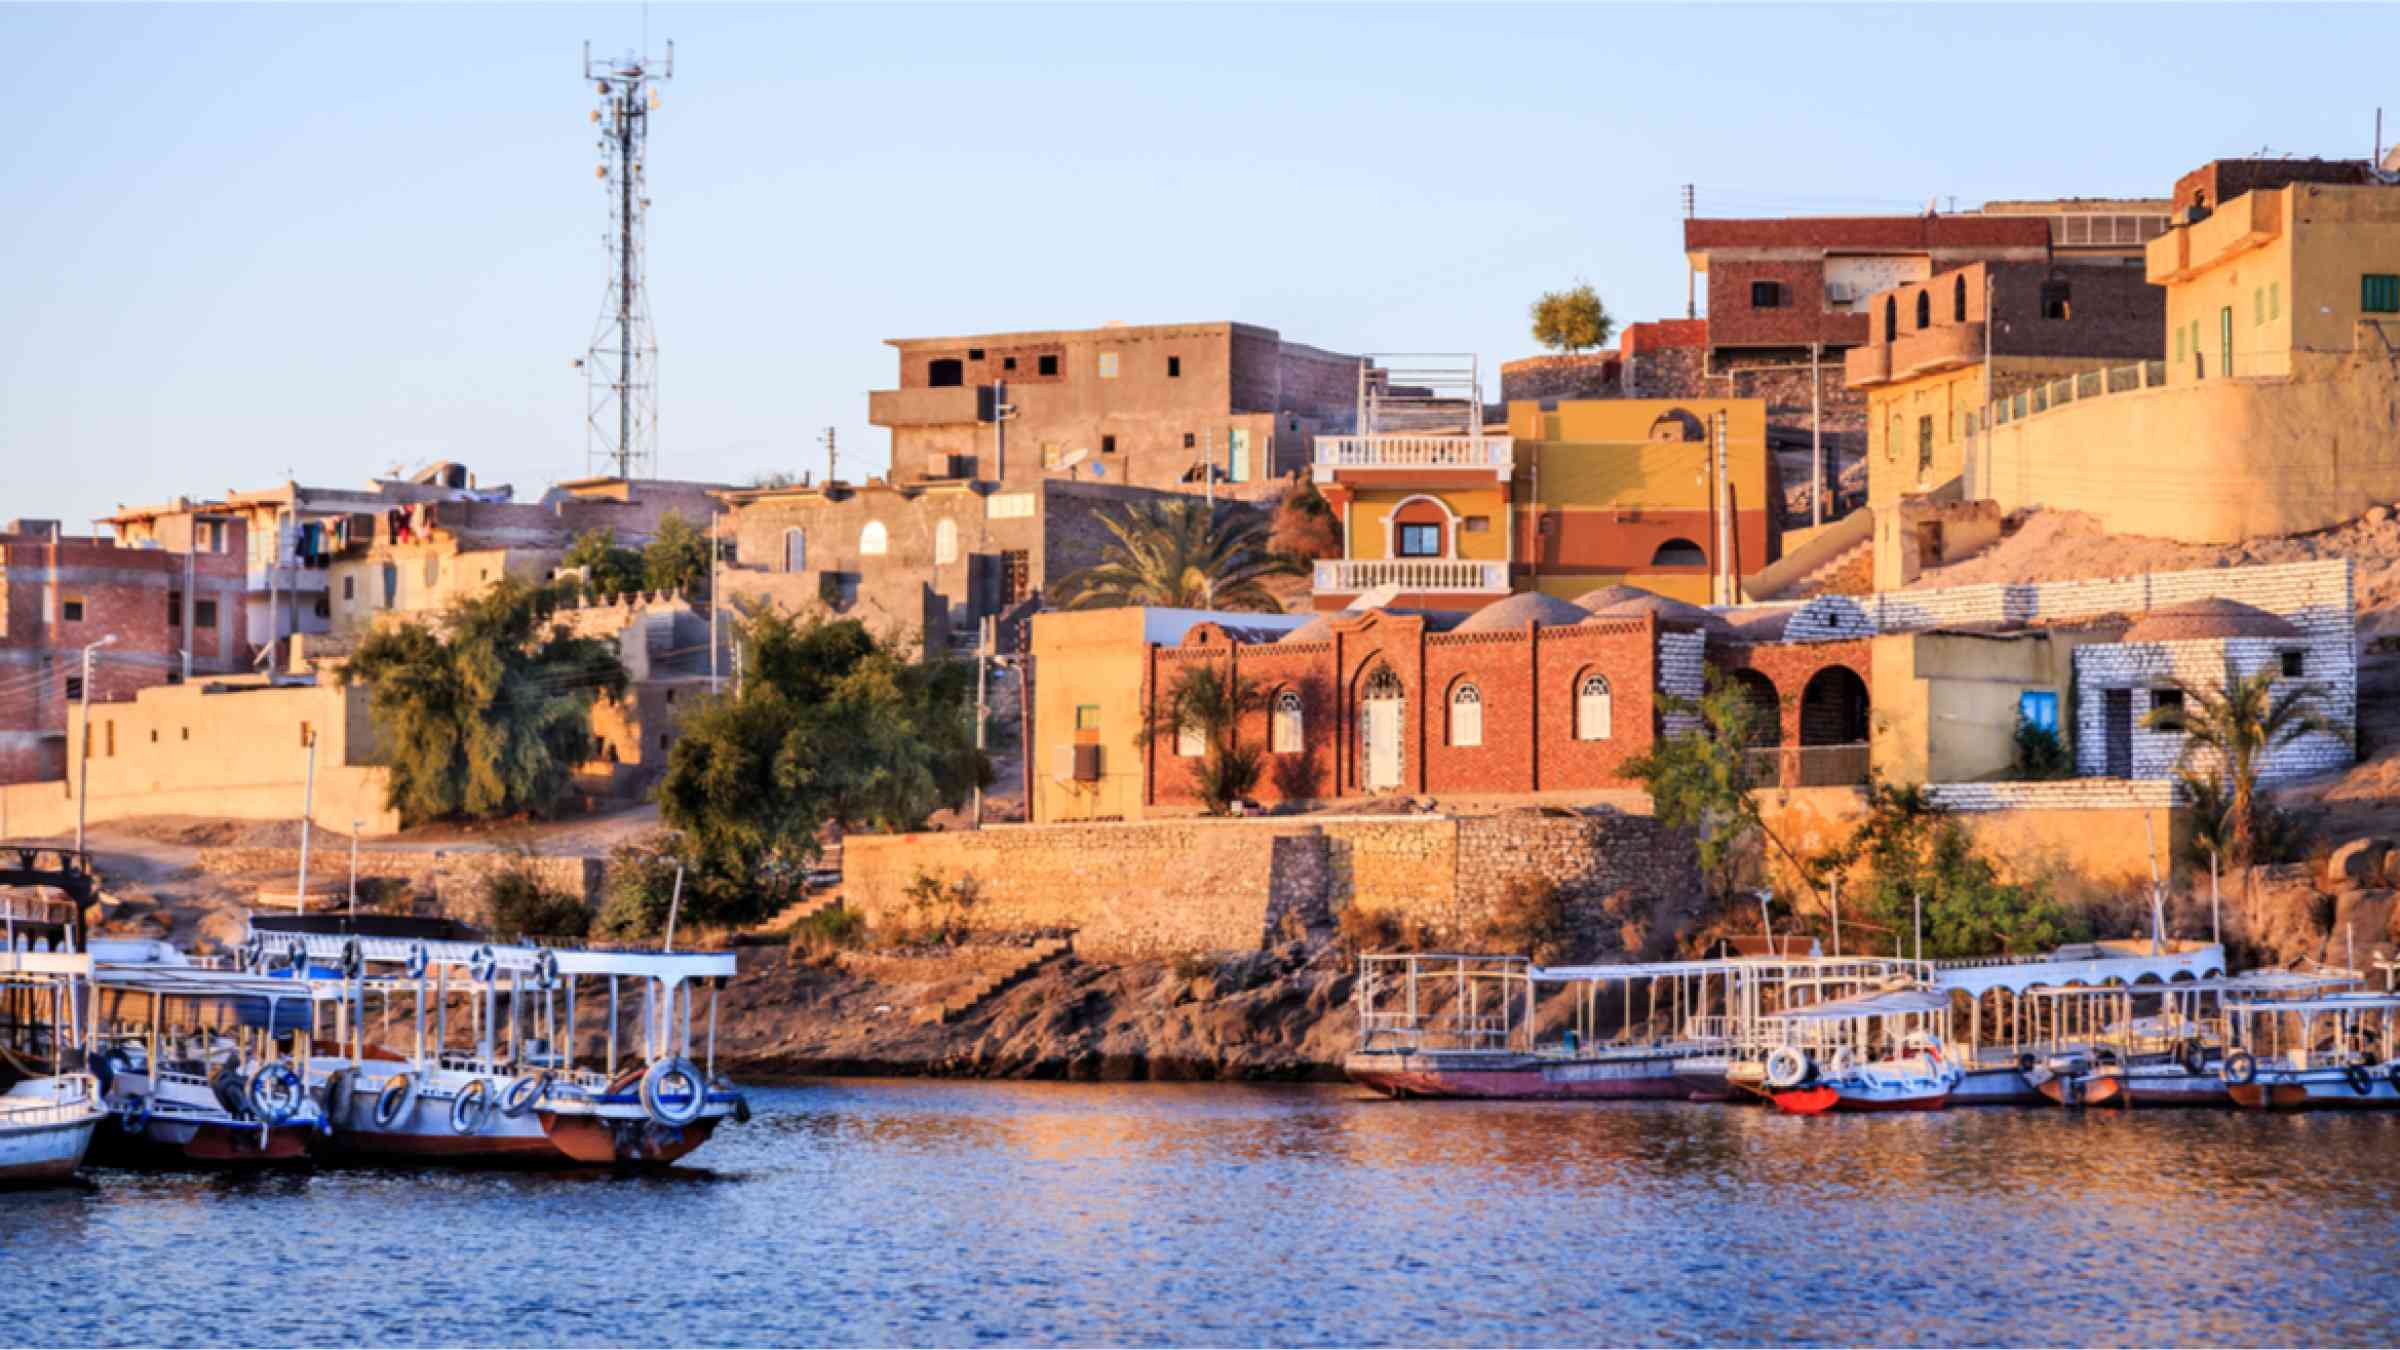 ooden boats carrying passengers sailing along the Nile along the temple of Philae in Aswan, Egypt, North Africa